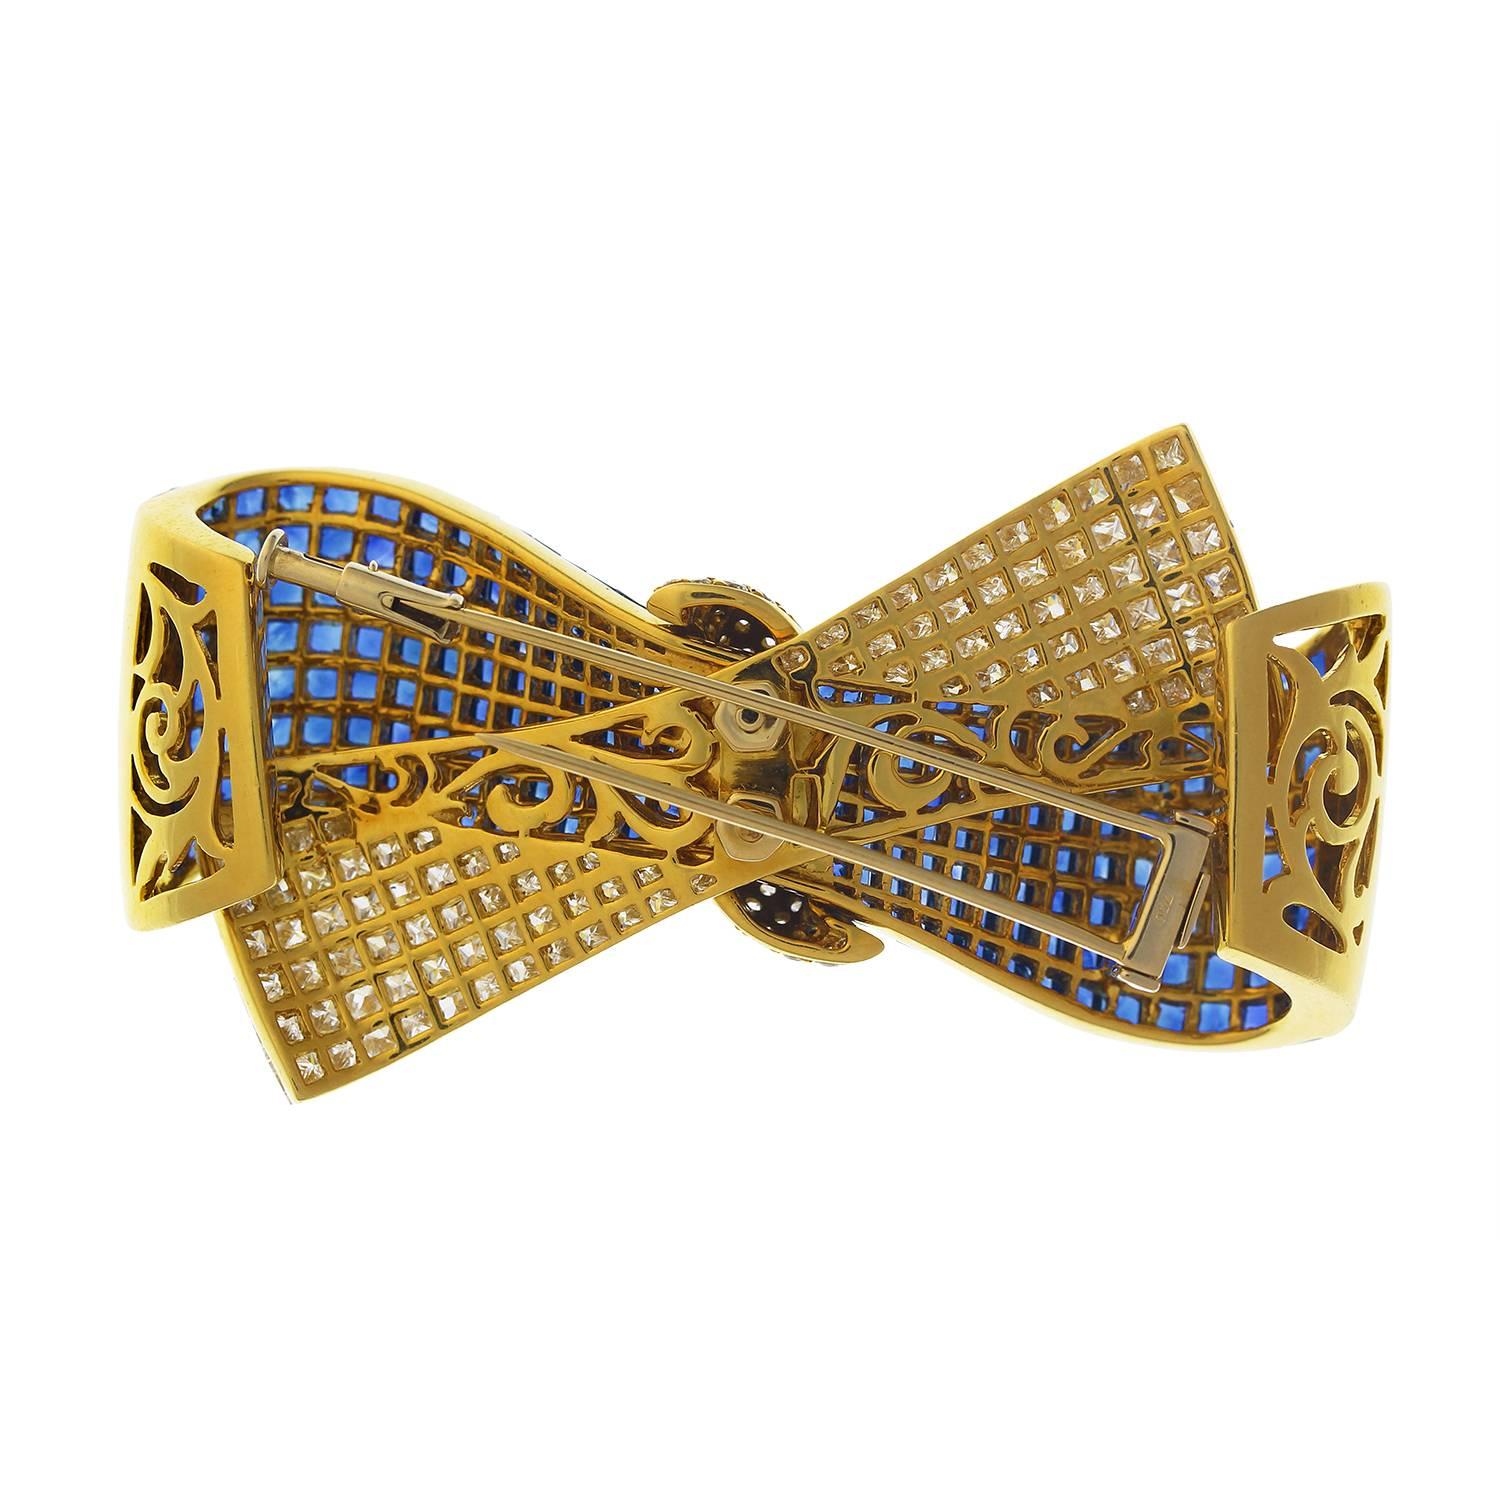 A gold sapphire and diamond bow brooch, the ribbon front invisibly set with calibré-set graduated sapphires & princess-cut diamonds, with bombé centre, pavé-set with brilliant-cut diamonds, marked 750 for 18KT gold. Approximately 6.5 cm (W) by